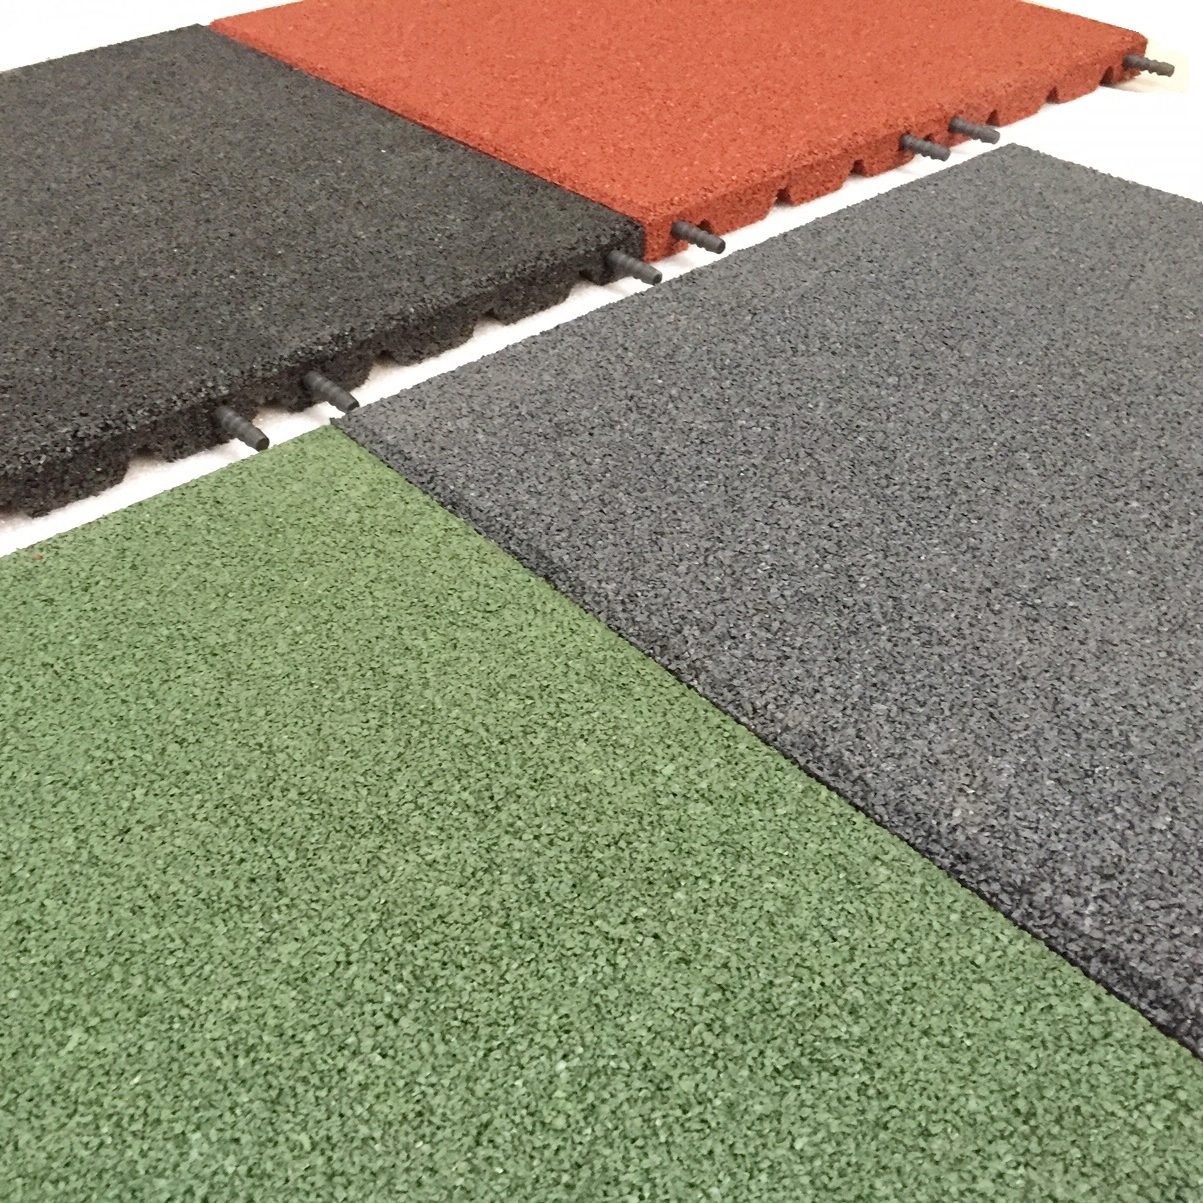 Kardinal Empfehlung beenden safety matting for outdoor play areas ...